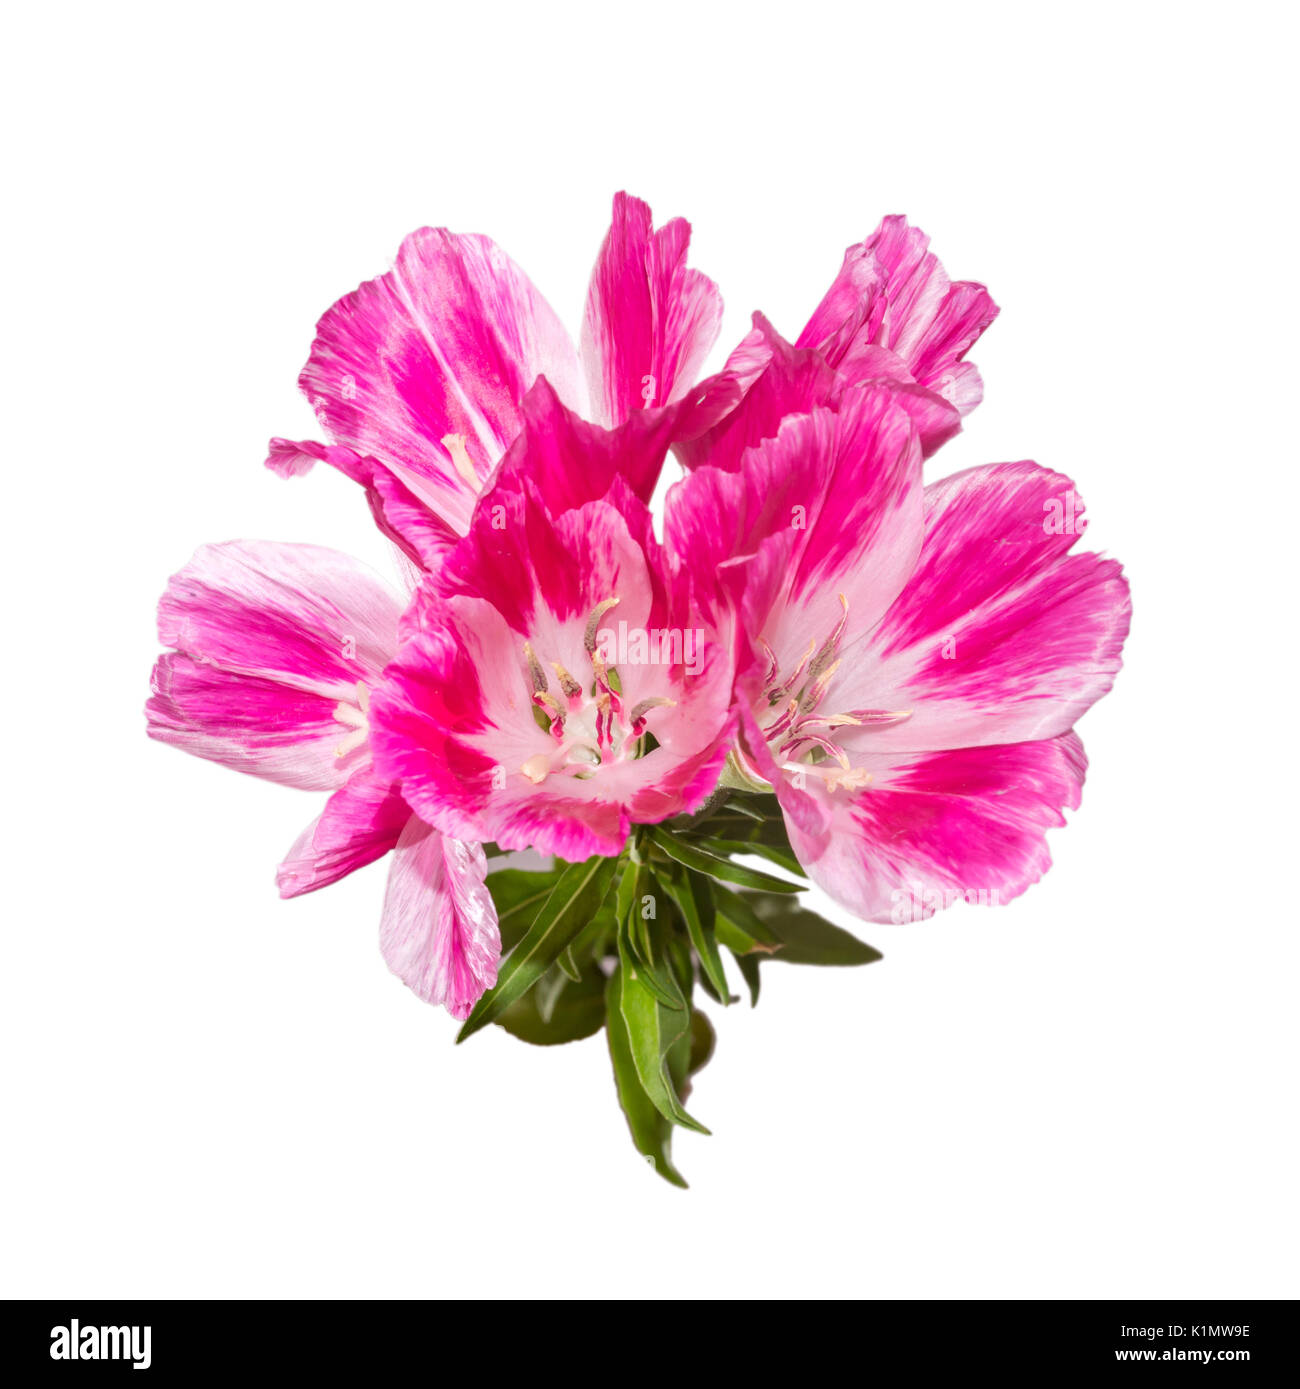 Godetia flower isolated. A branch of beautiful pink and purple spring flowers Stock Photo